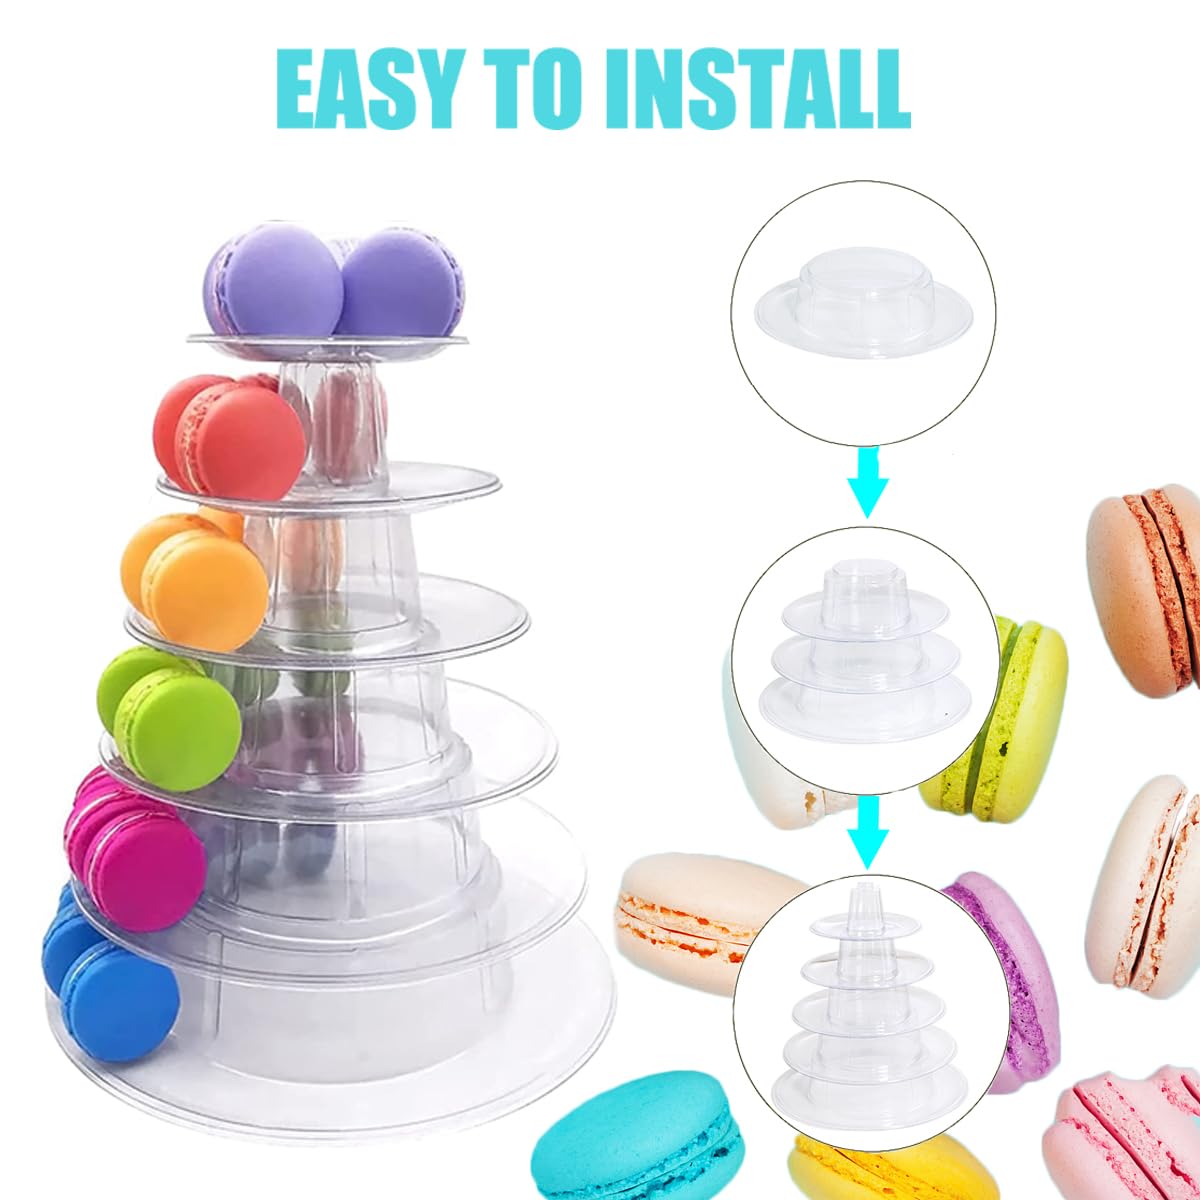 6 Tiers Round Macaron Tower Cake Stand Macaron Display Rack , Plastic Tiered Cake Dessert Serving Tower Tray for Wedding,Baby Shower and Birthday Party Decor